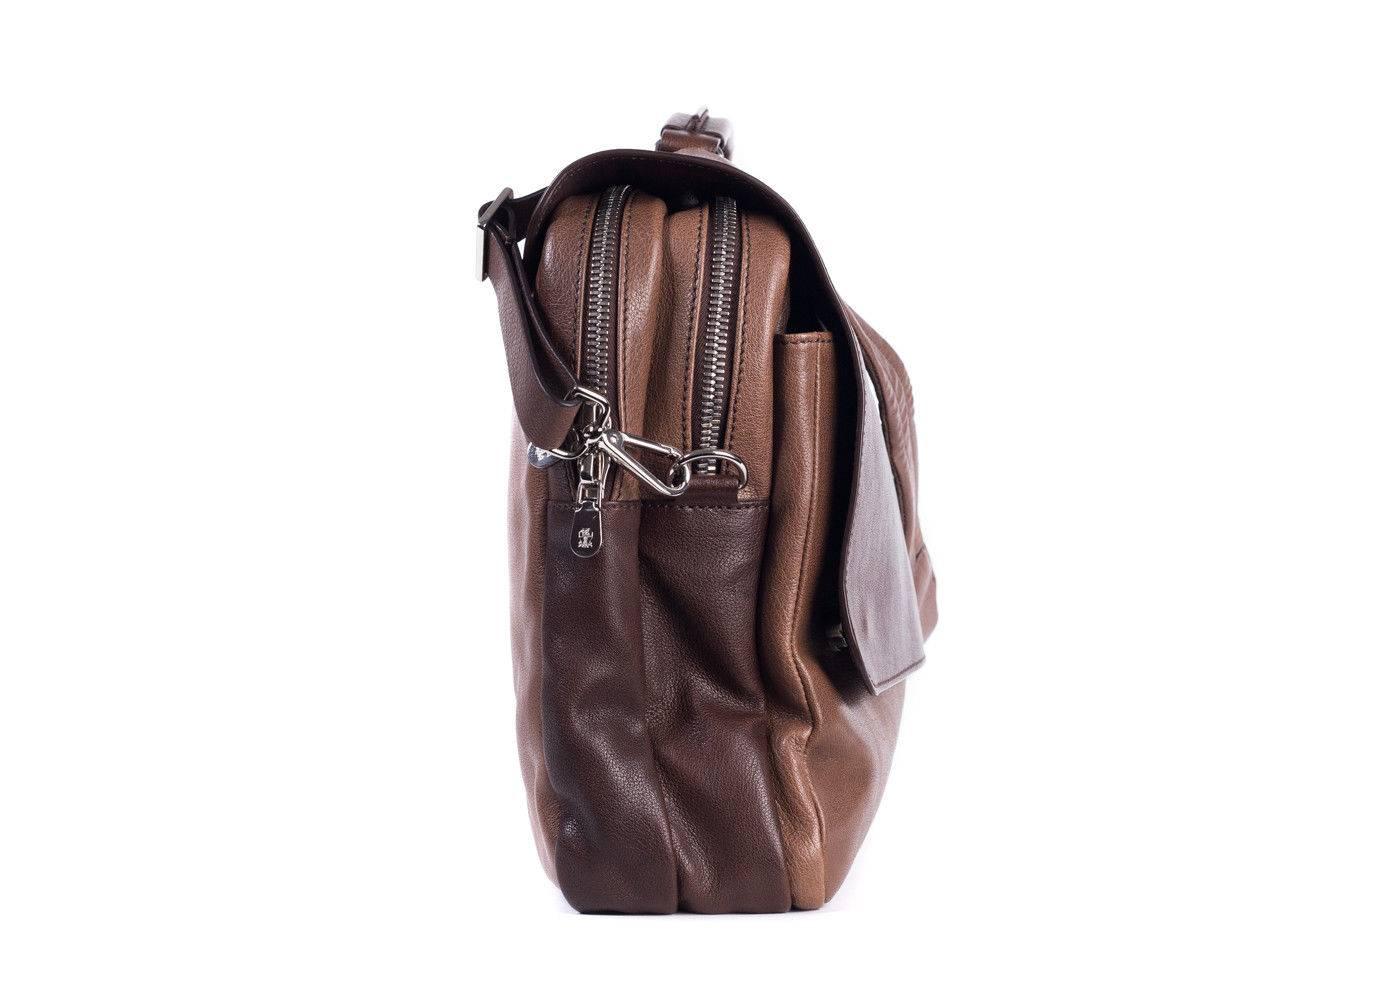 Brand New Brunello Cucinelli Messenger Bag
Dust Bag Included
Retails in Stores & Online for $2885
Dimensions: 17